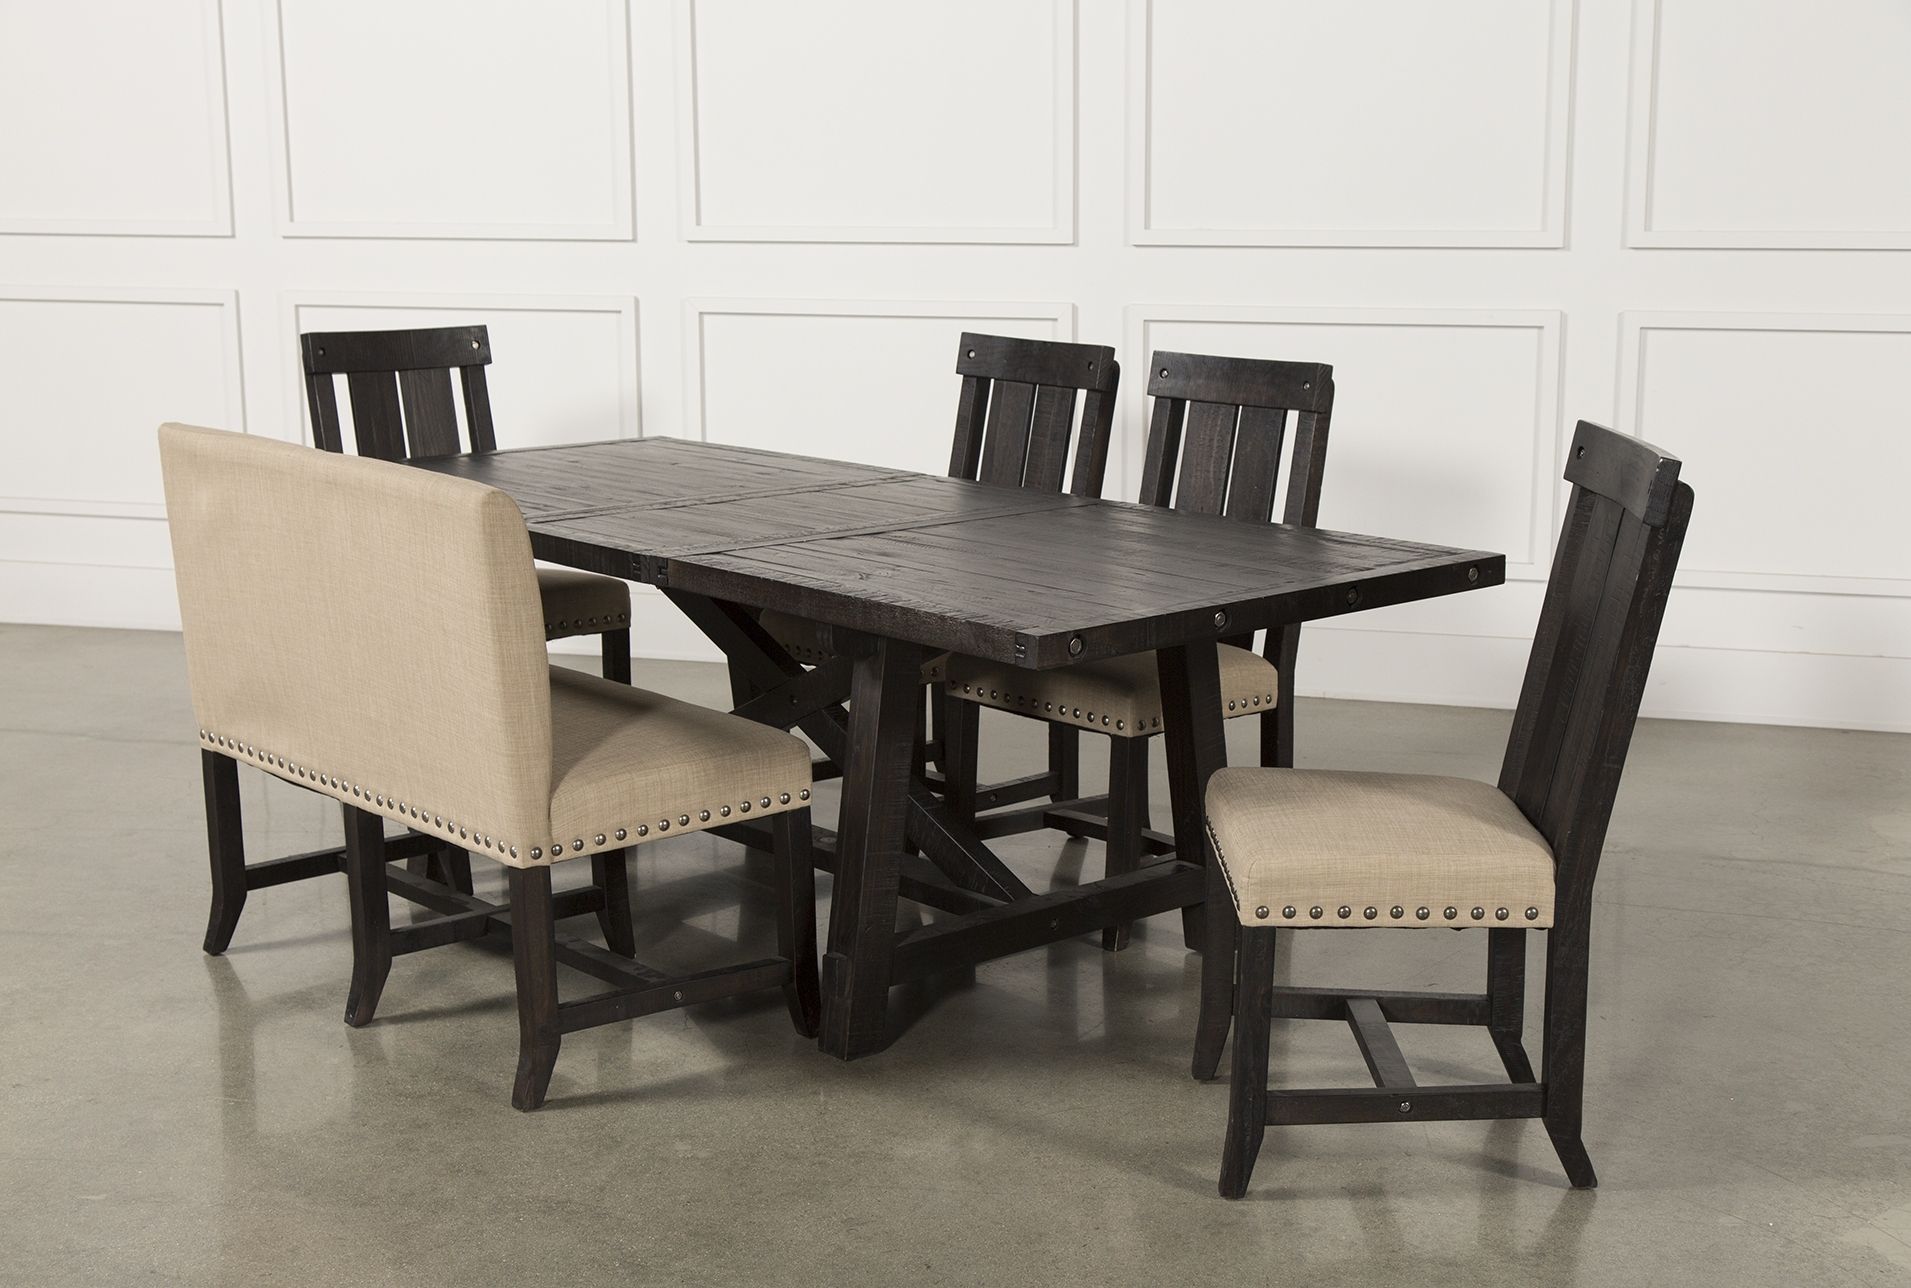 Jaxon 6 Piece Rectangle Dining Sets With Bench & Wood Chairs Regarding Latest Jaxon 6 Piece Rectangle Dining Set W/bench & Wood Chairs (Photo 1 of 25)